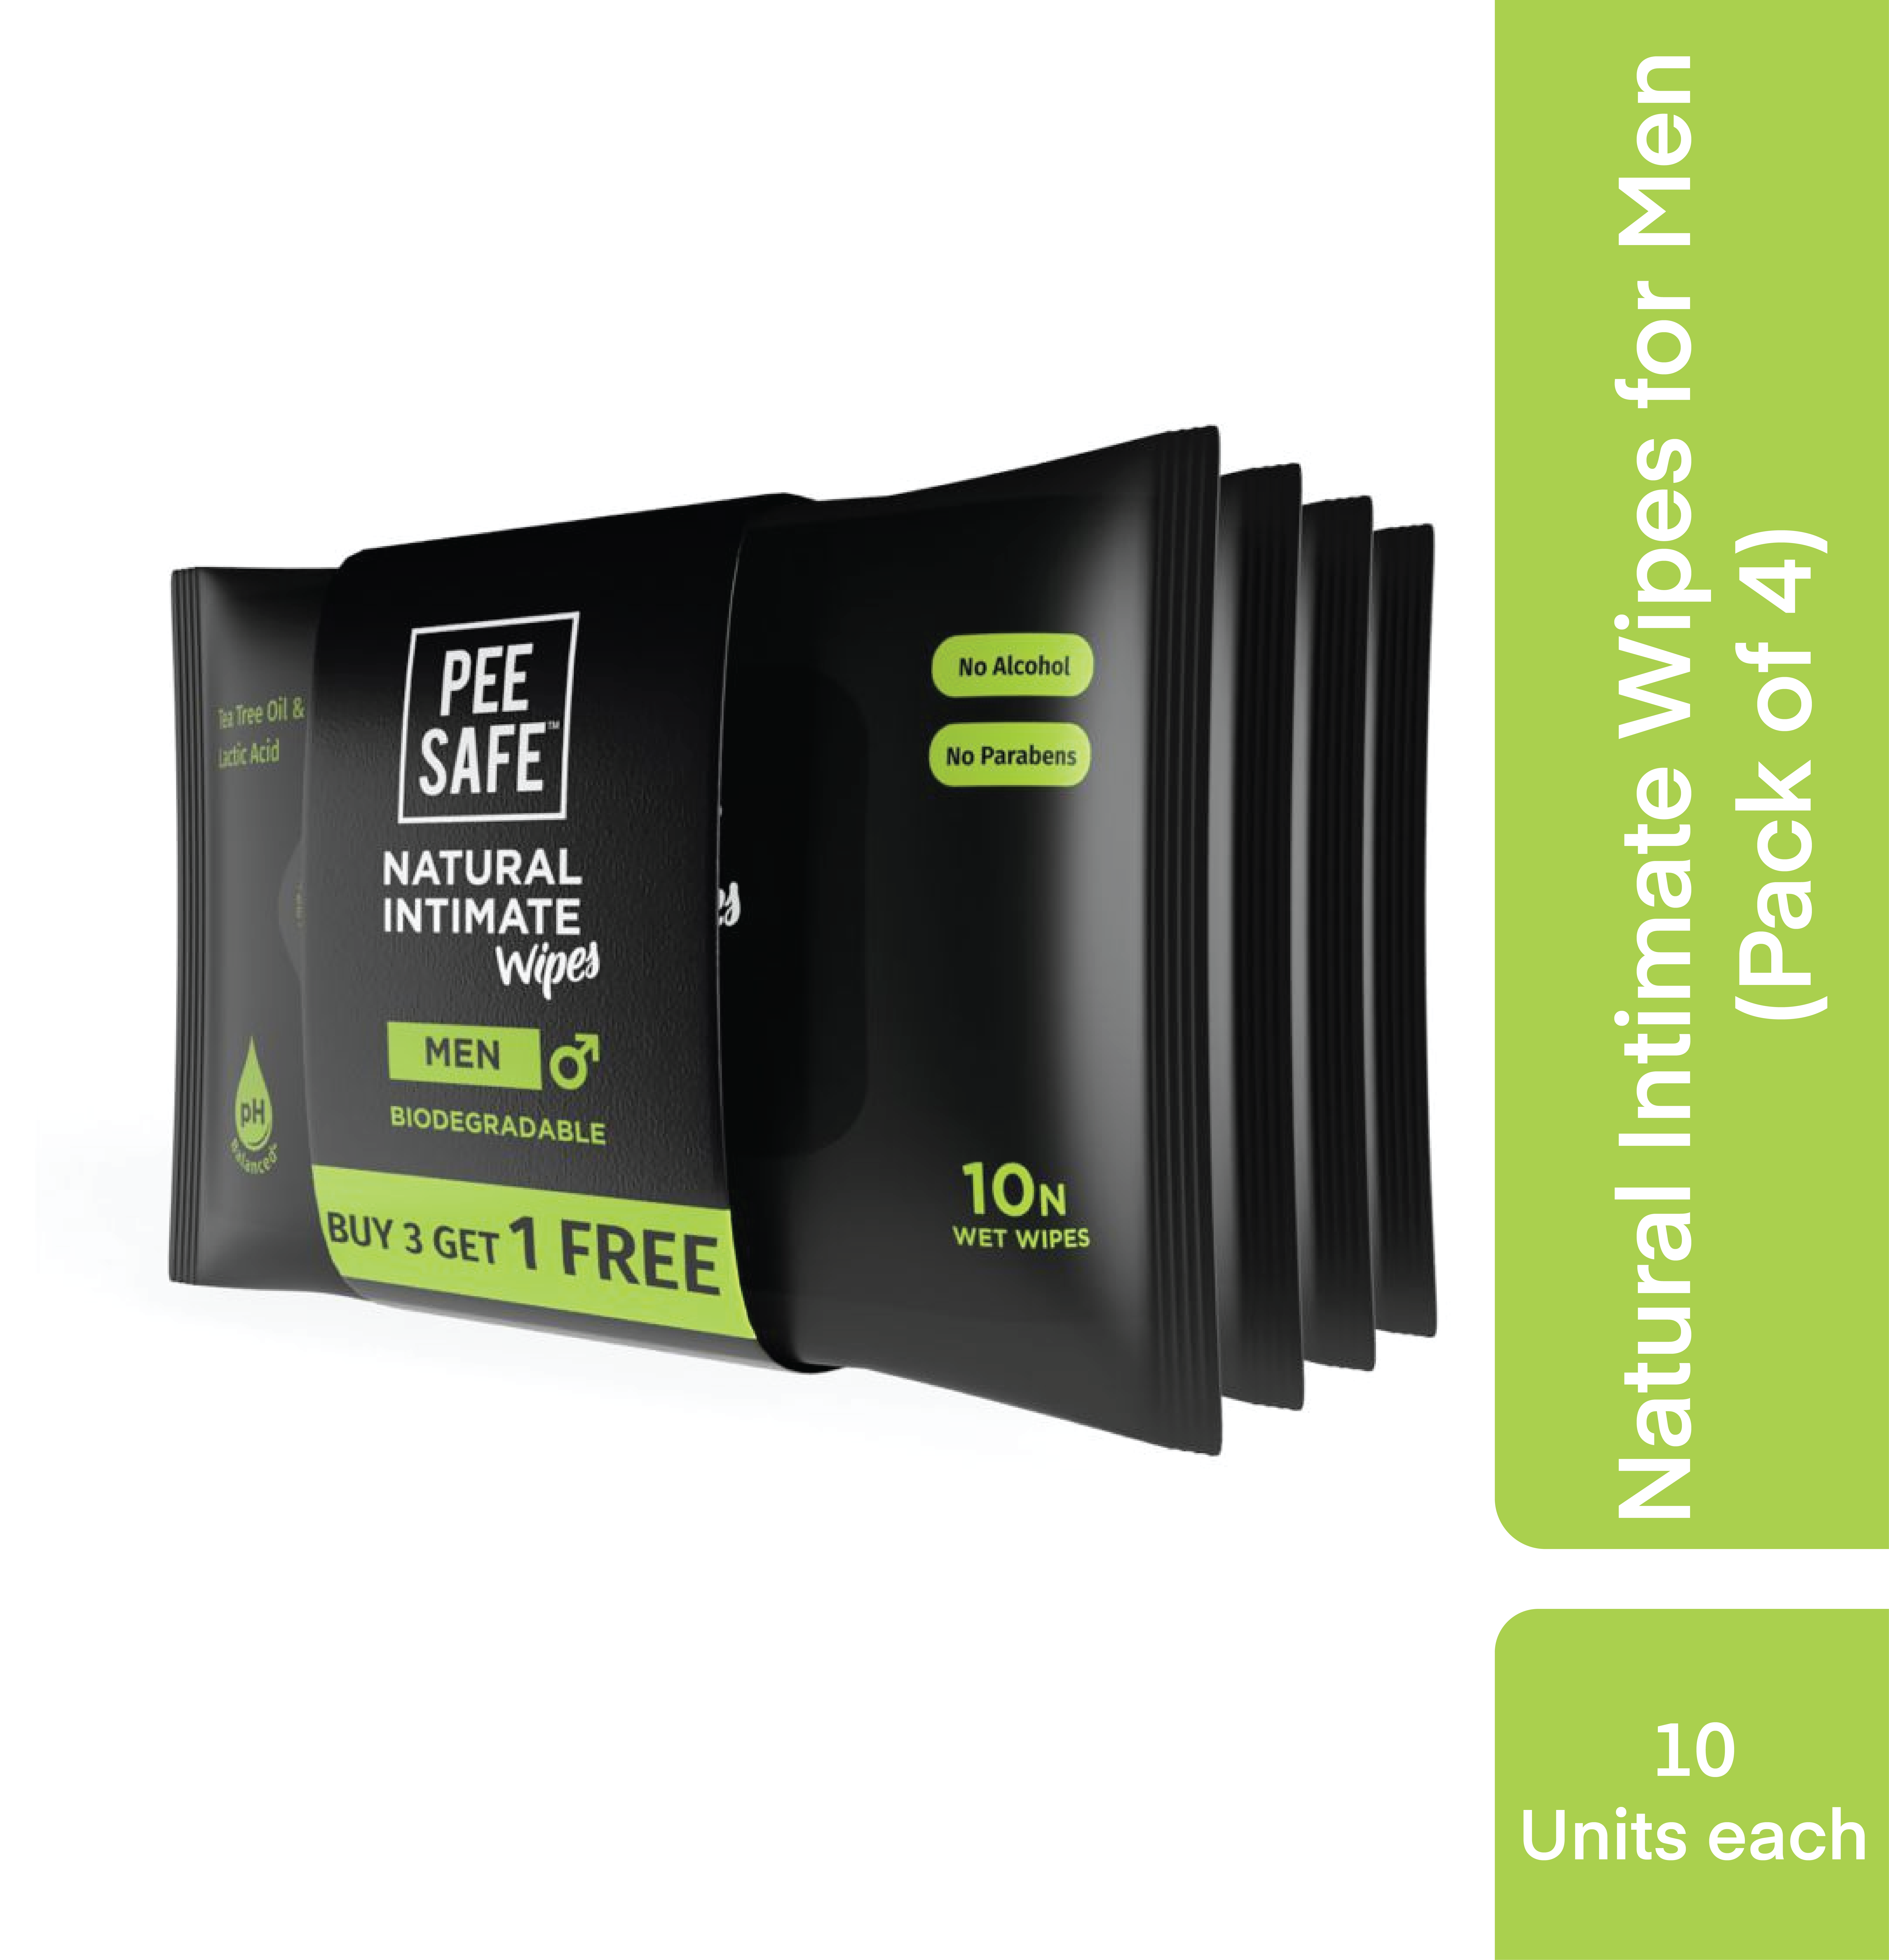 Pee Safe Intimate Wipes for Men, Biodegradable, pH balanced - 40 Wipes (Pack of 4)